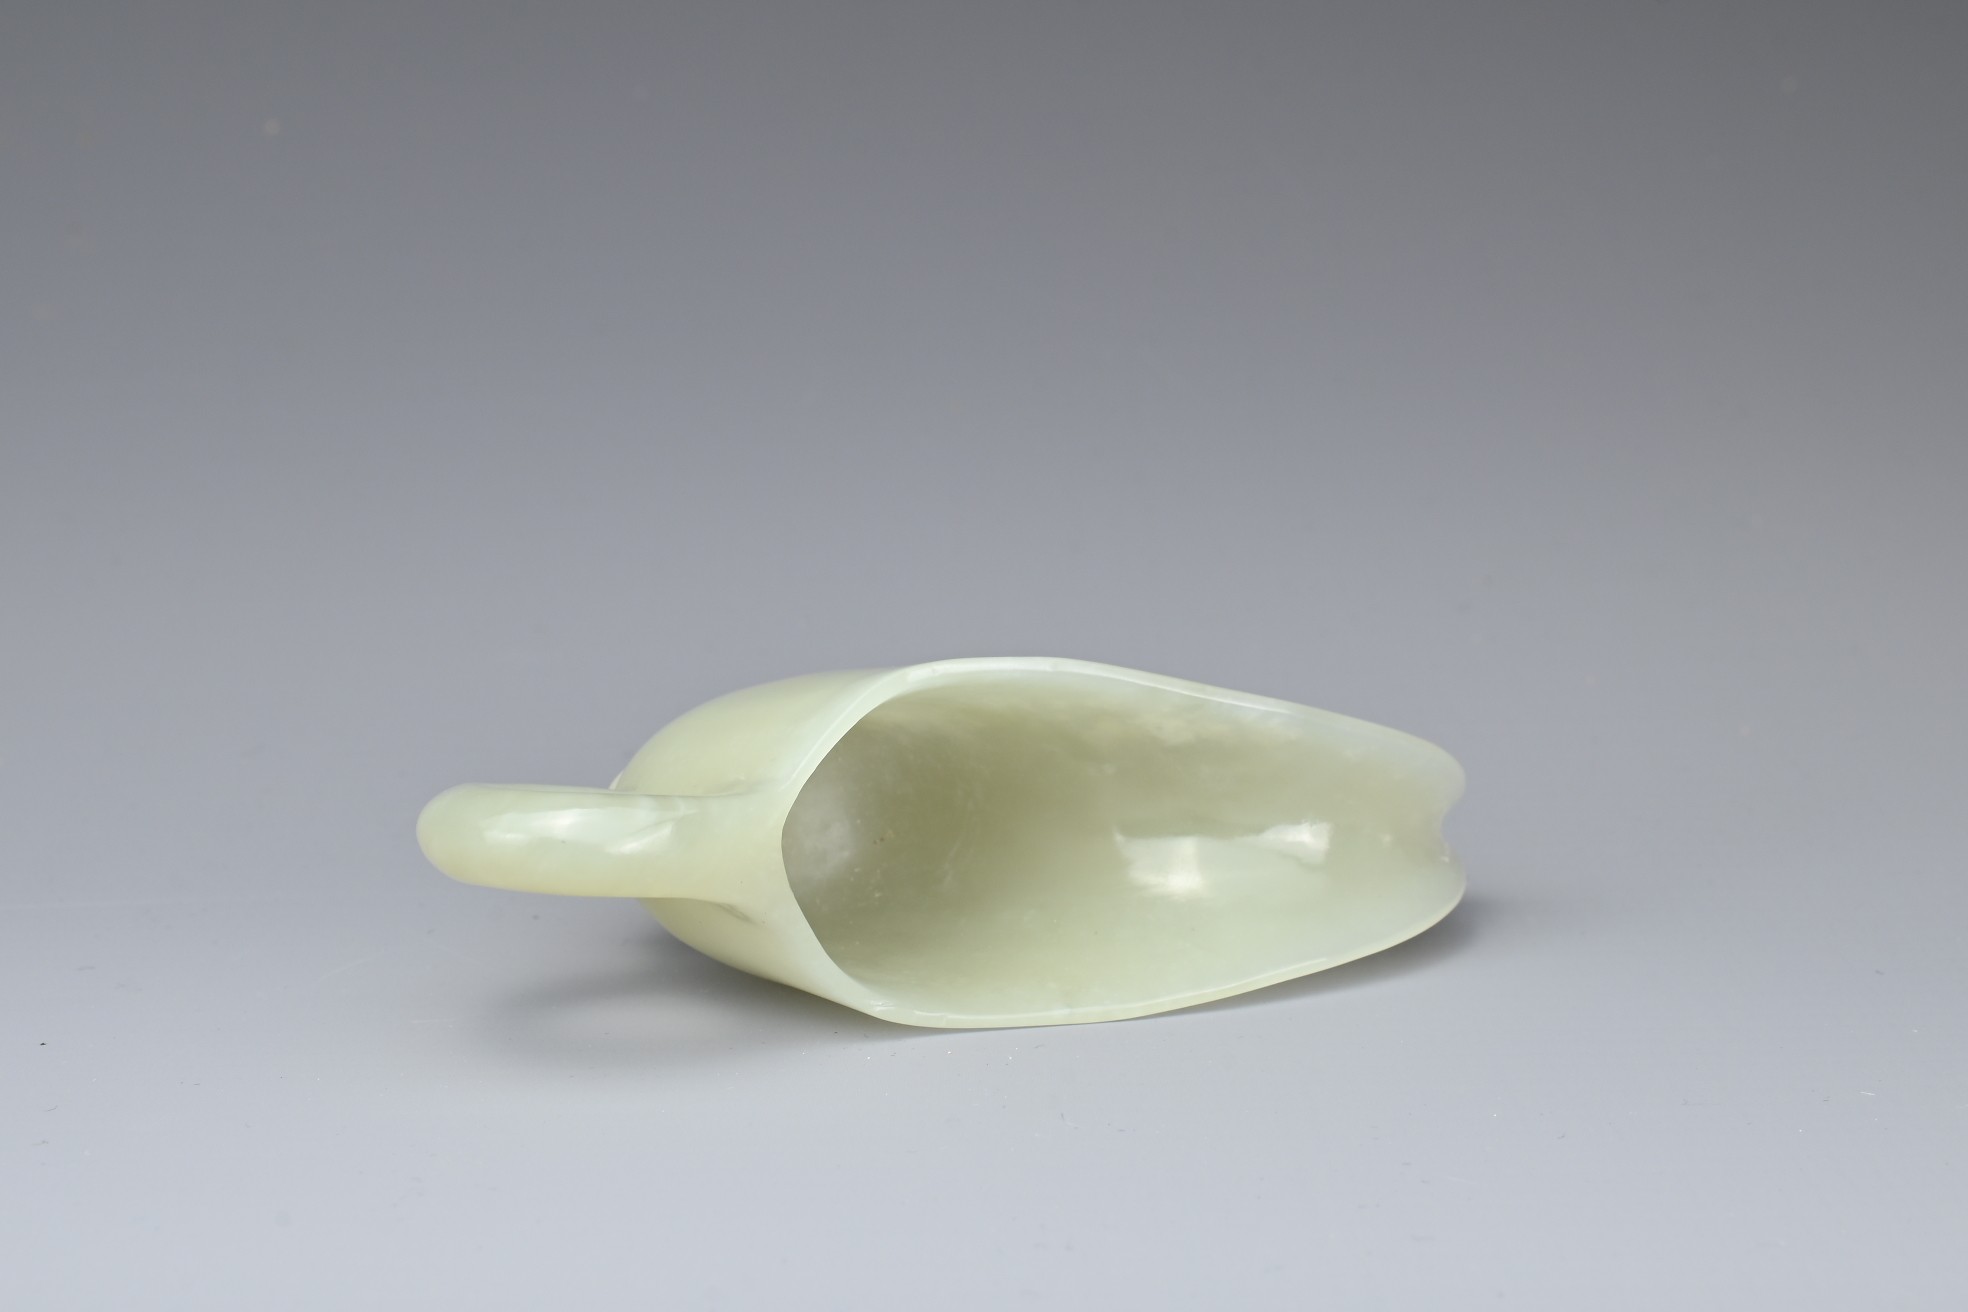 A CHINESE PALE CELADON JADE CUP. Of slender form with a looped handle and curved spout. 10.5cm - Image 7 of 7